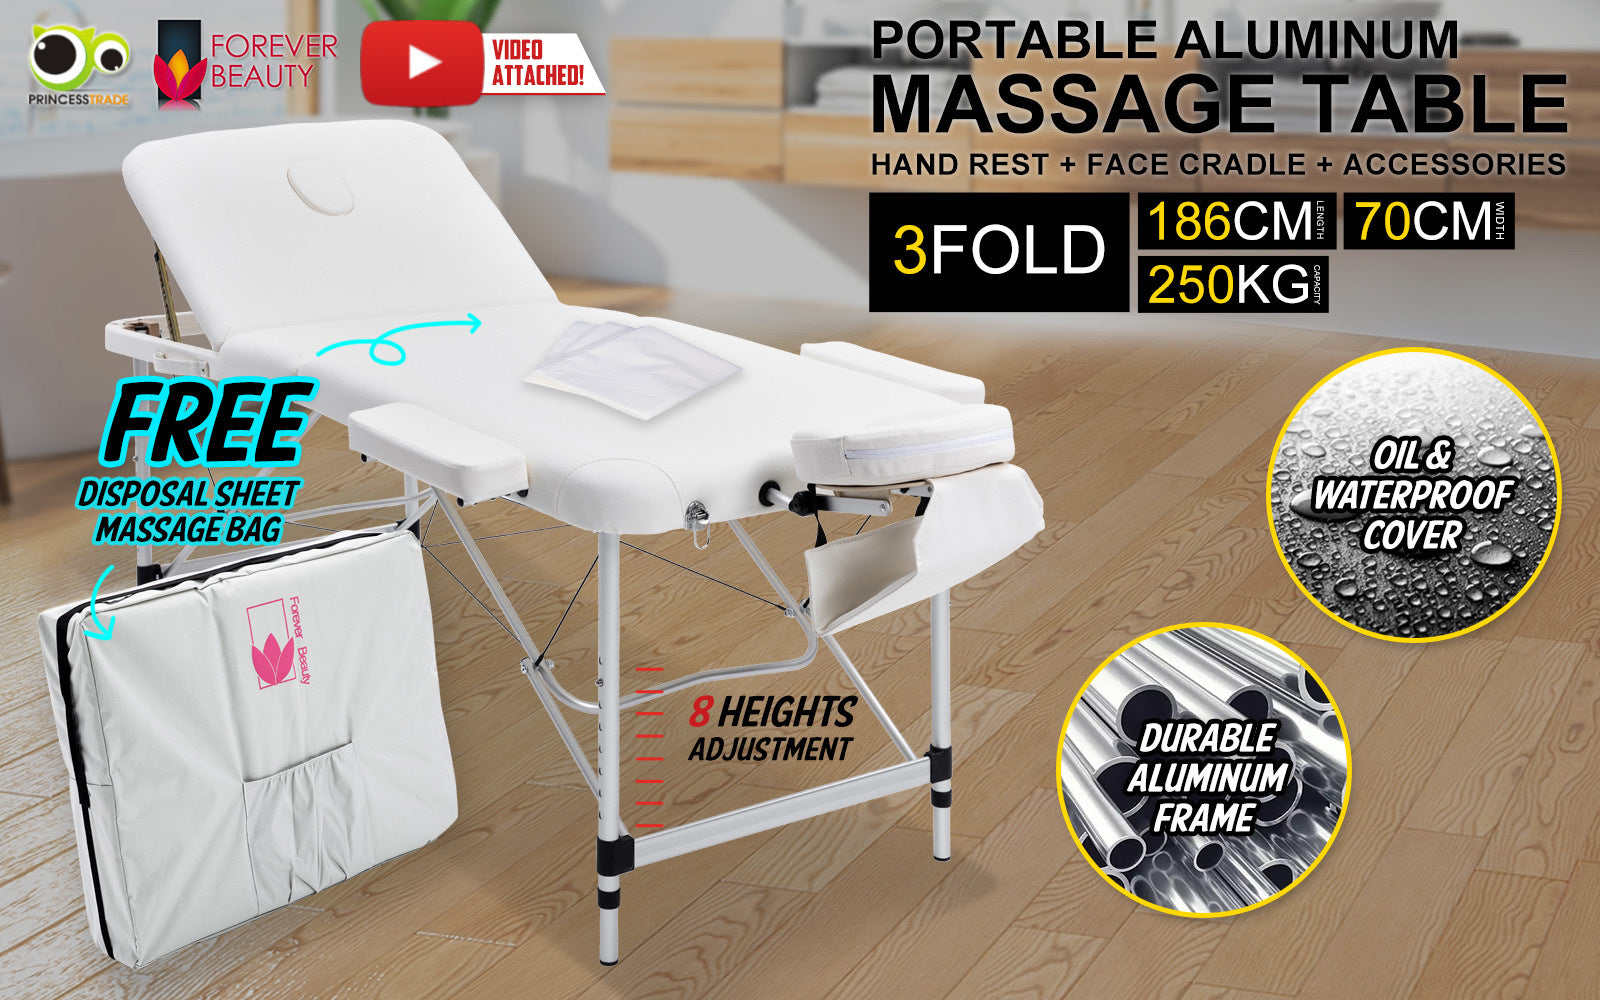 Forever Beauty White Portable Beauty Massage Table Bed Therapy Waxing 3 Fold 70cm Aluminium - SILBERSHELL